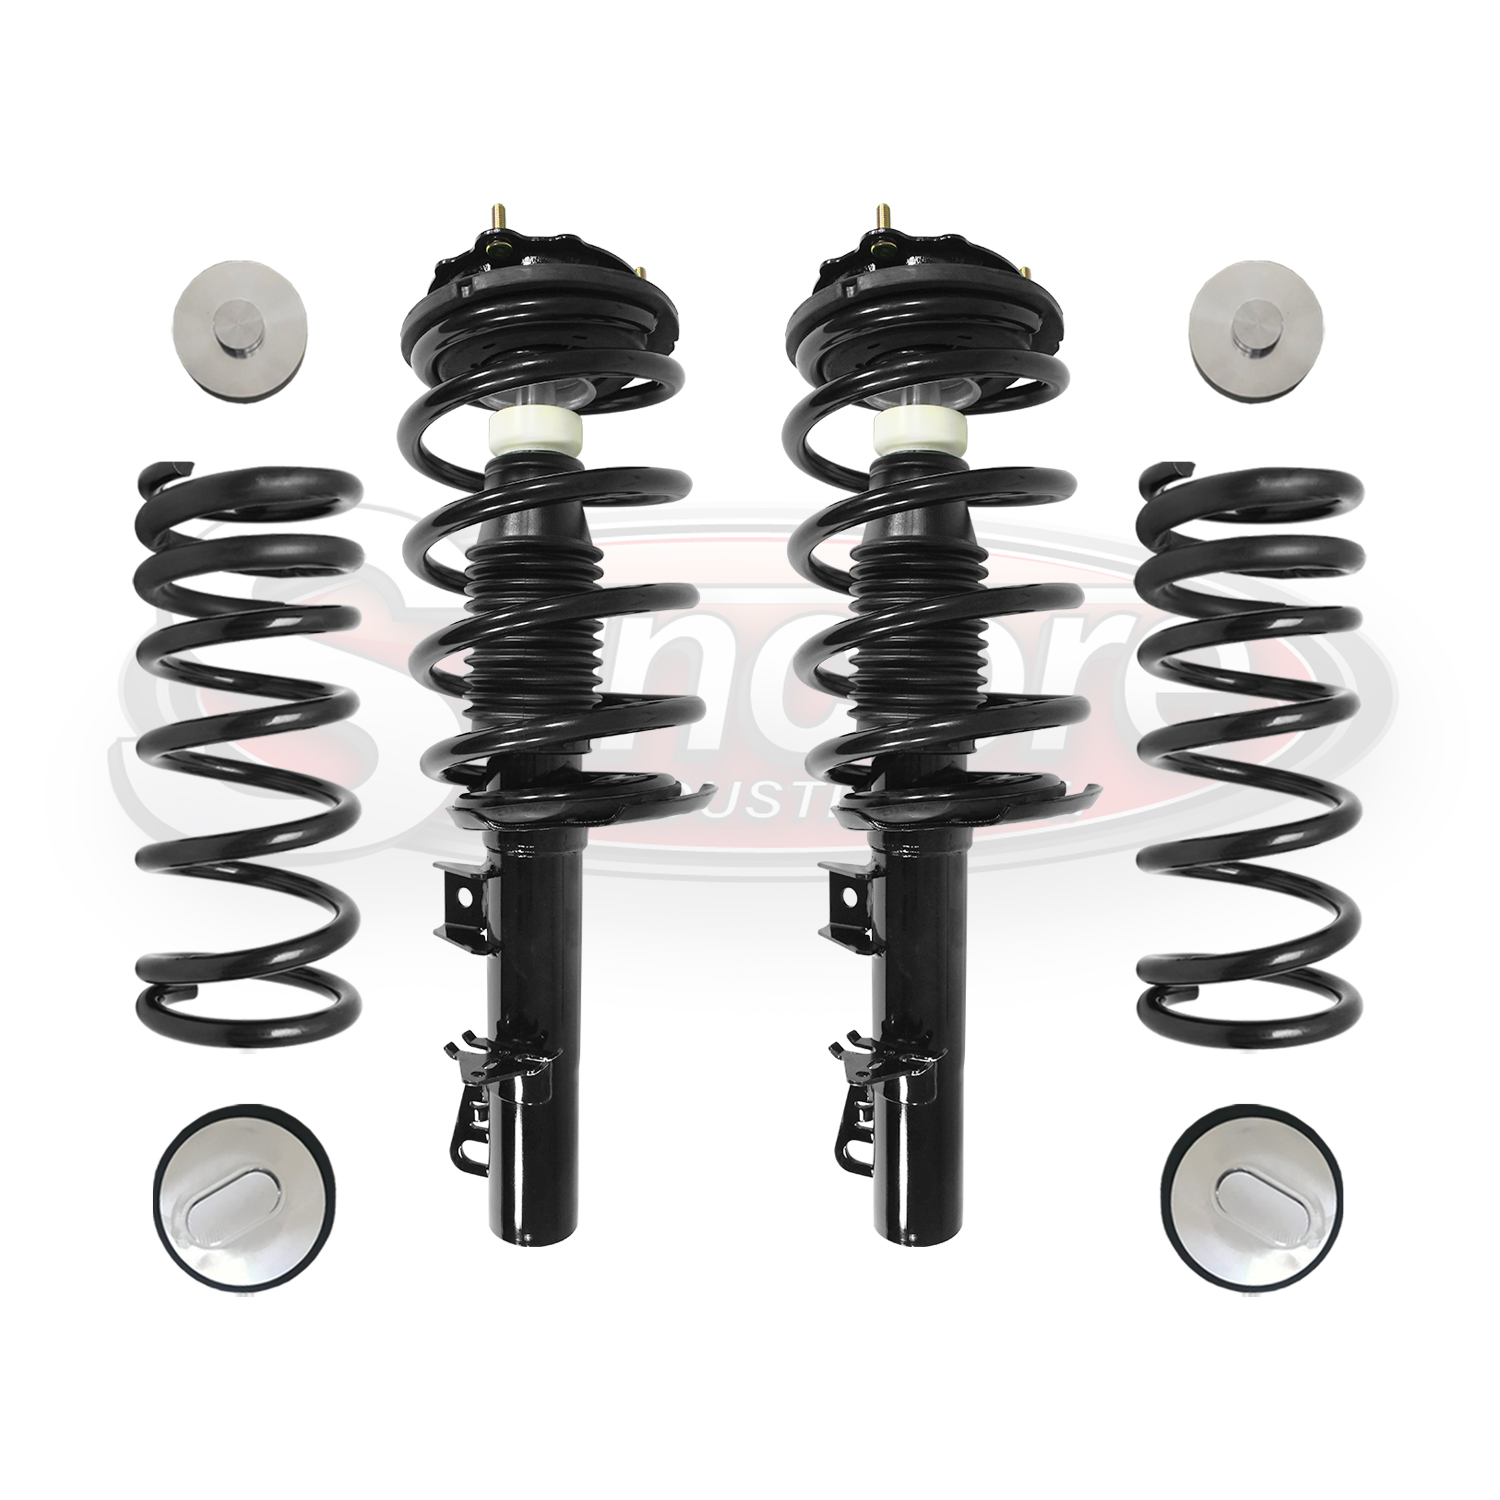 1995-2002 Lincoln Continental Front & Rear Air Suspension to Complete Struts & Coil Springs Conversion Kit